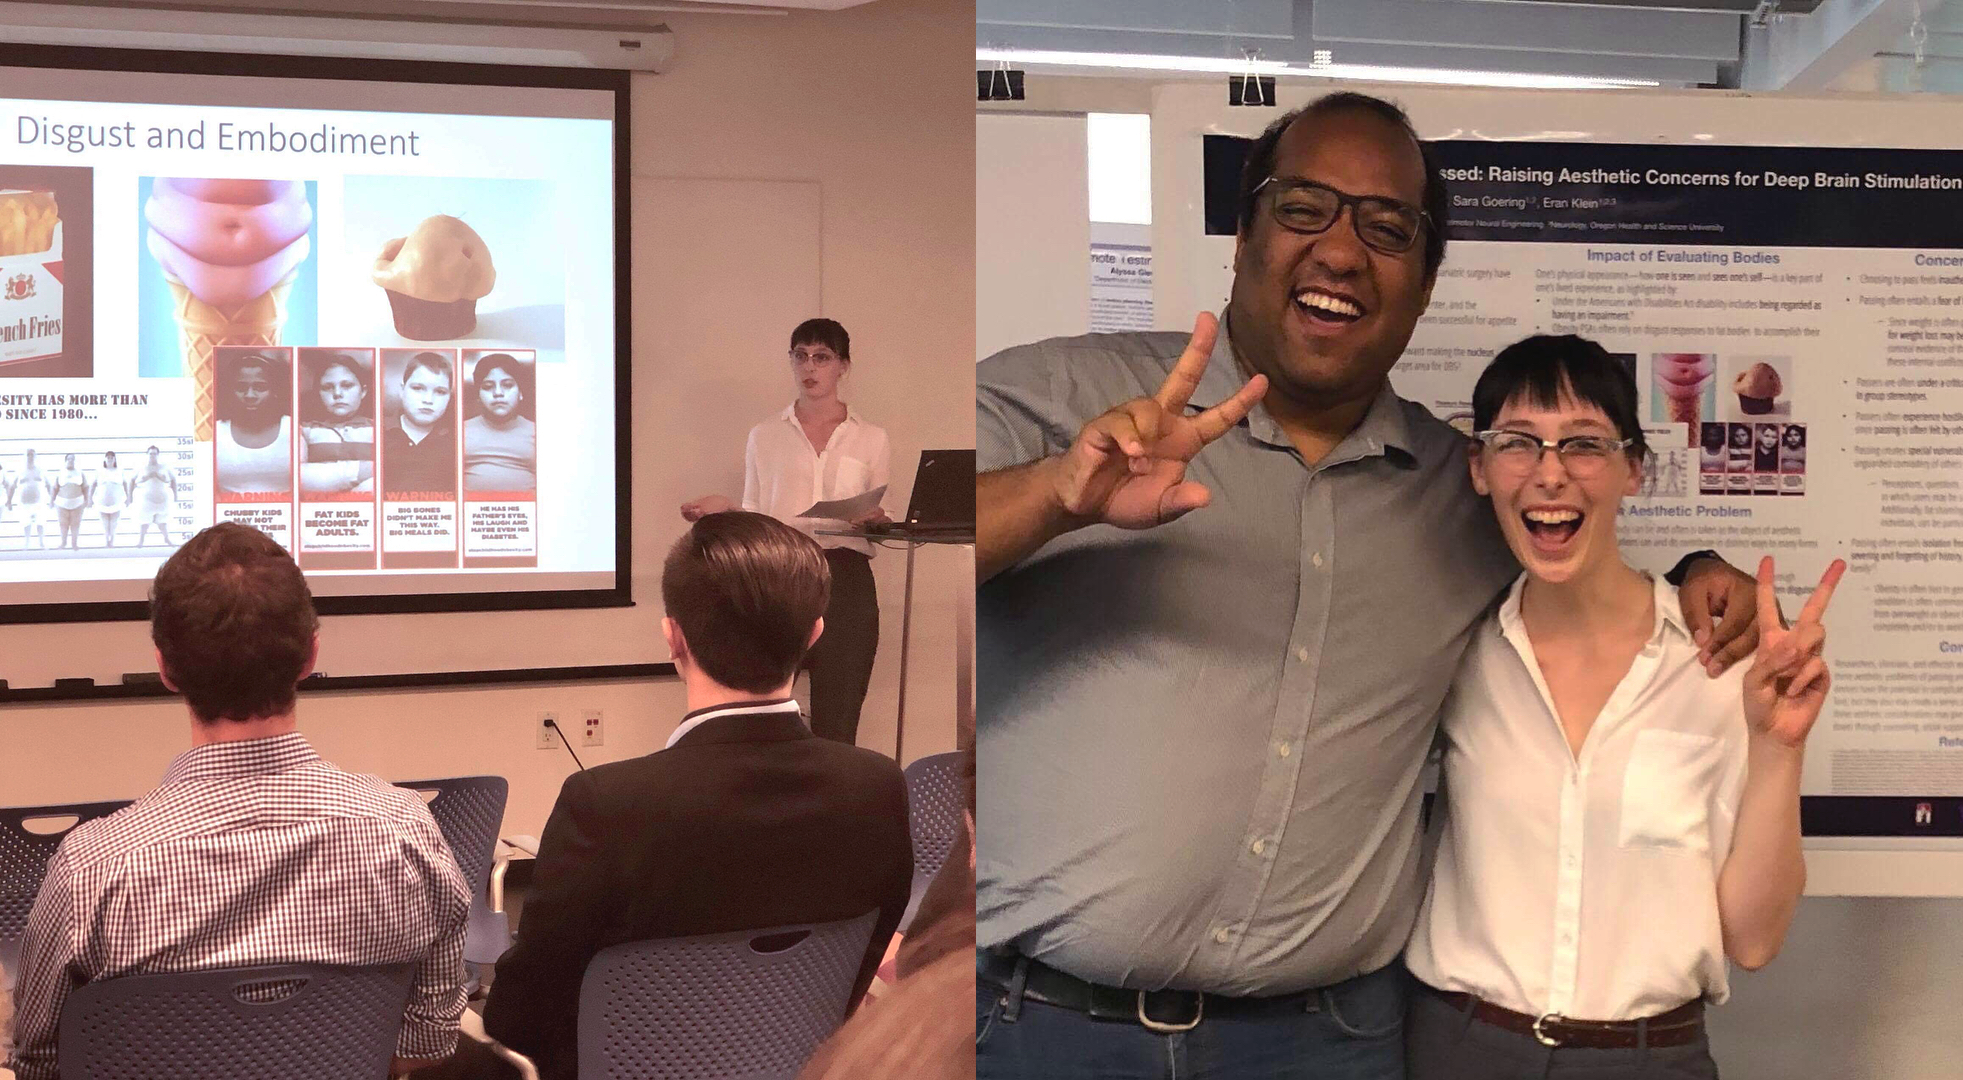 On the left, Hannah Martens stands behind a podium. Behind her is a presentation slide titled “Disgust and Embodiment.” On the right, me and Hannah throw up peace signs in front of her poster.